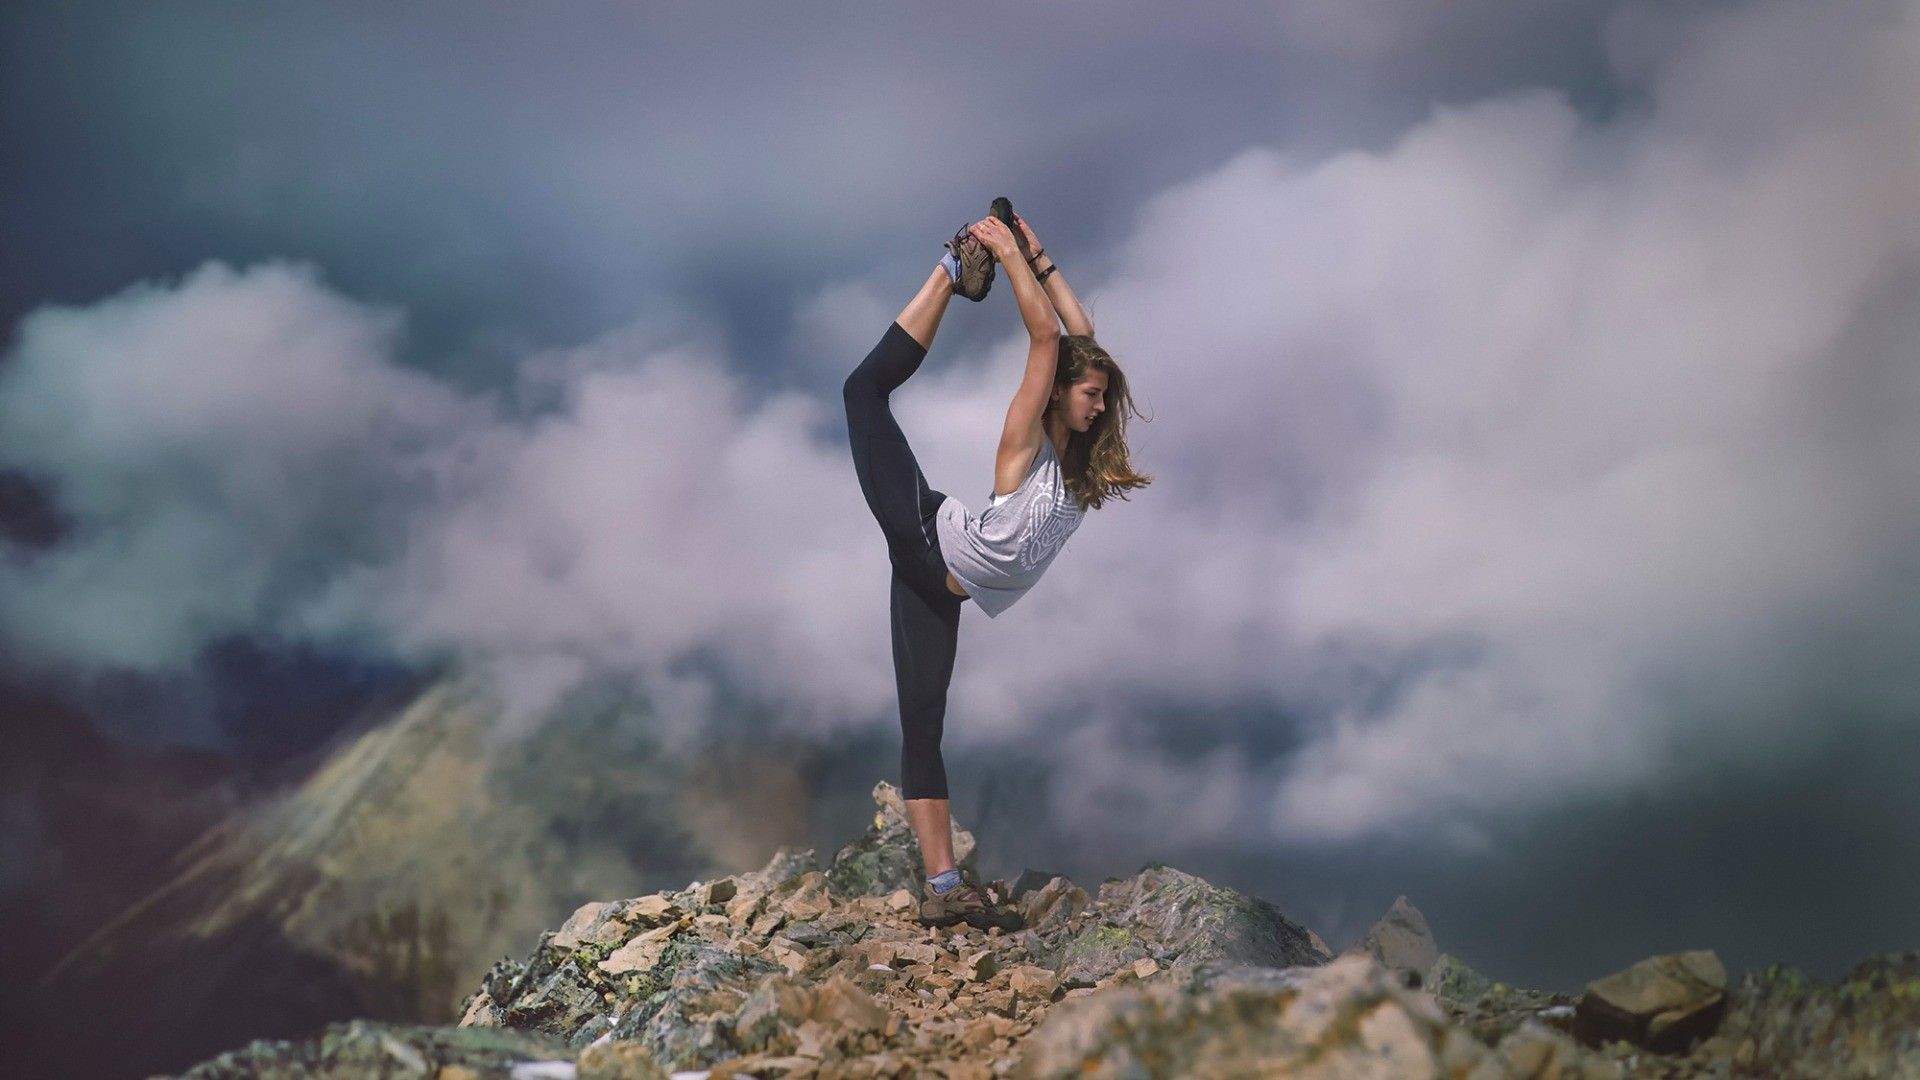 yoga, depth of field, tank top, mist, clouds, rock, mountains